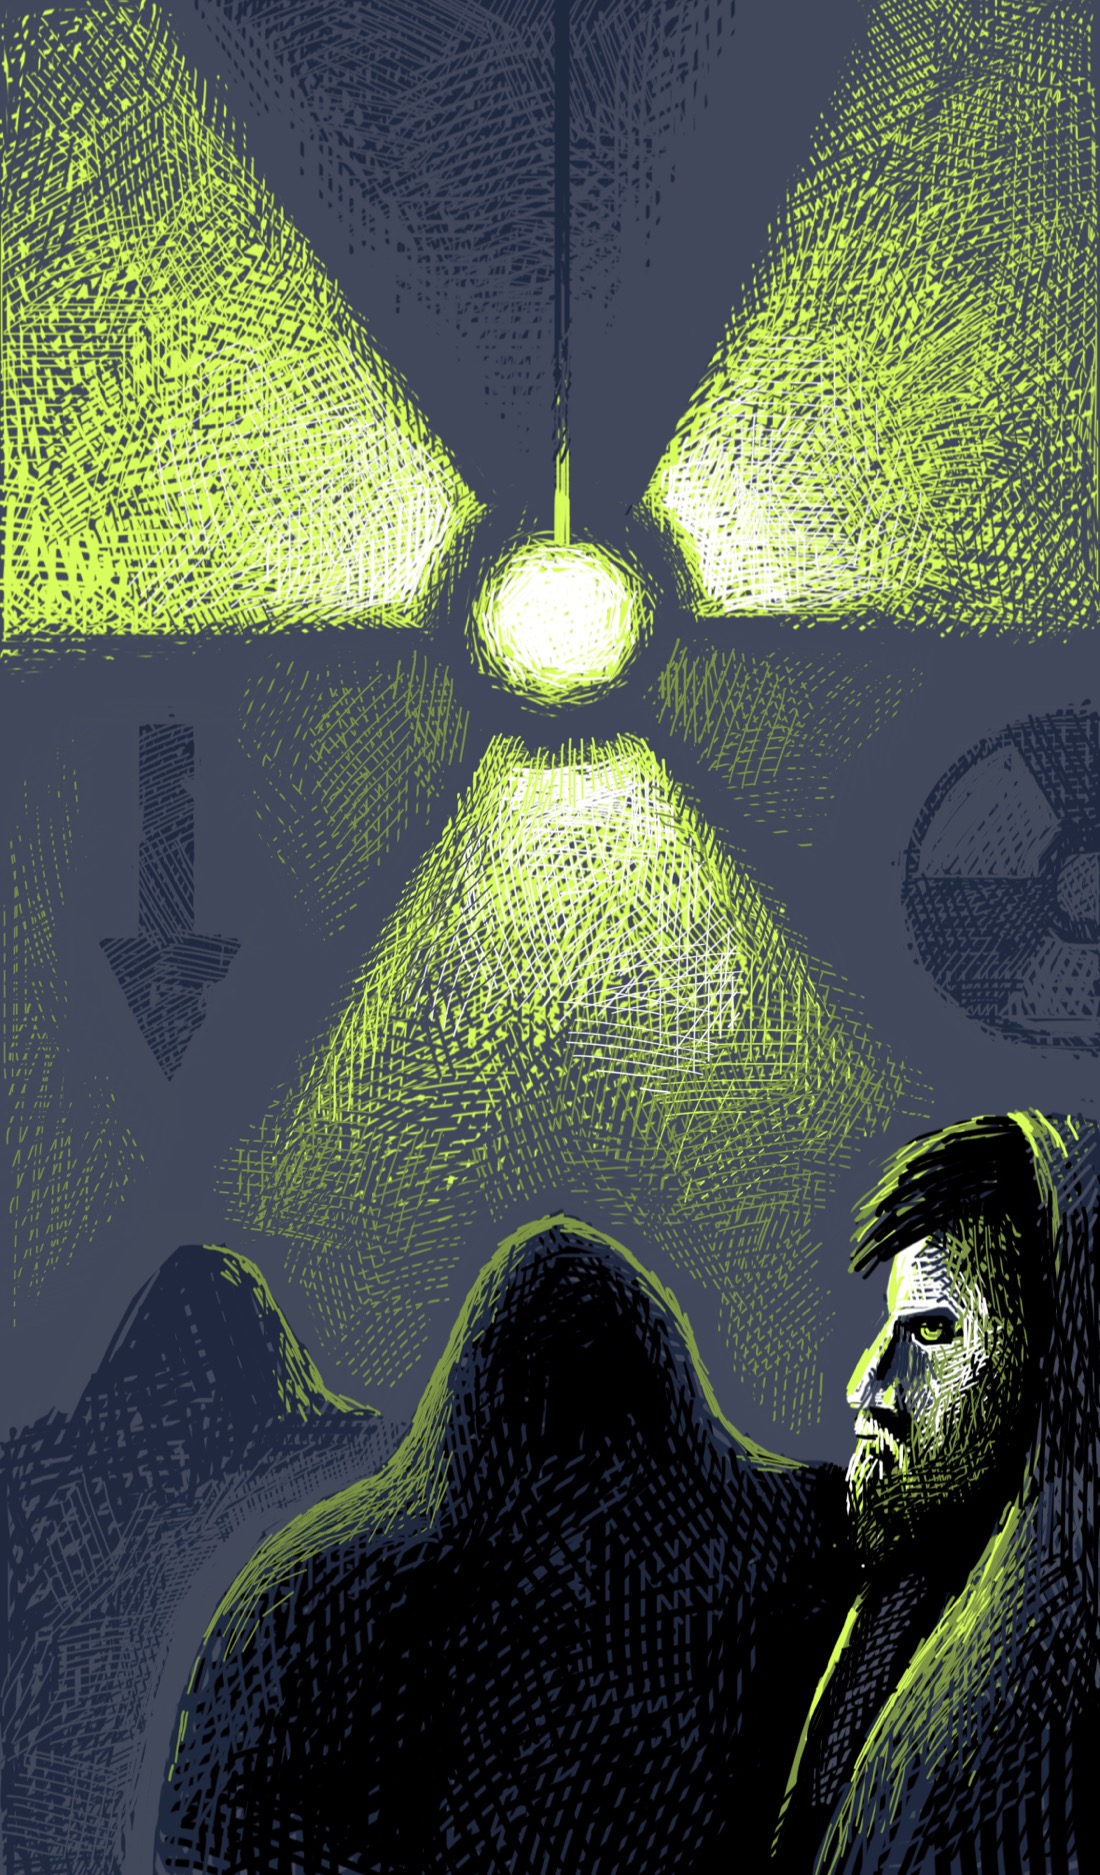 A blazing phosphor-green light in the center of a dark chamber casts three rays that resemble a radioactive trefoil. Standing in front of it, seen from the back, are two robed, hooded figures that seem to be staring at it. A third robed figure stands to the right, partially turned, face visible in profile. This person is heavily bearded, face glowing pale white in the glow of the light. On the wall of the room are visible two symbols: an arrow pointing down, and a stenciled radioactive symbol. No one knows quite what they signify, but the Wasteland Elders speak of demons in the earth, and the wise do not question them.